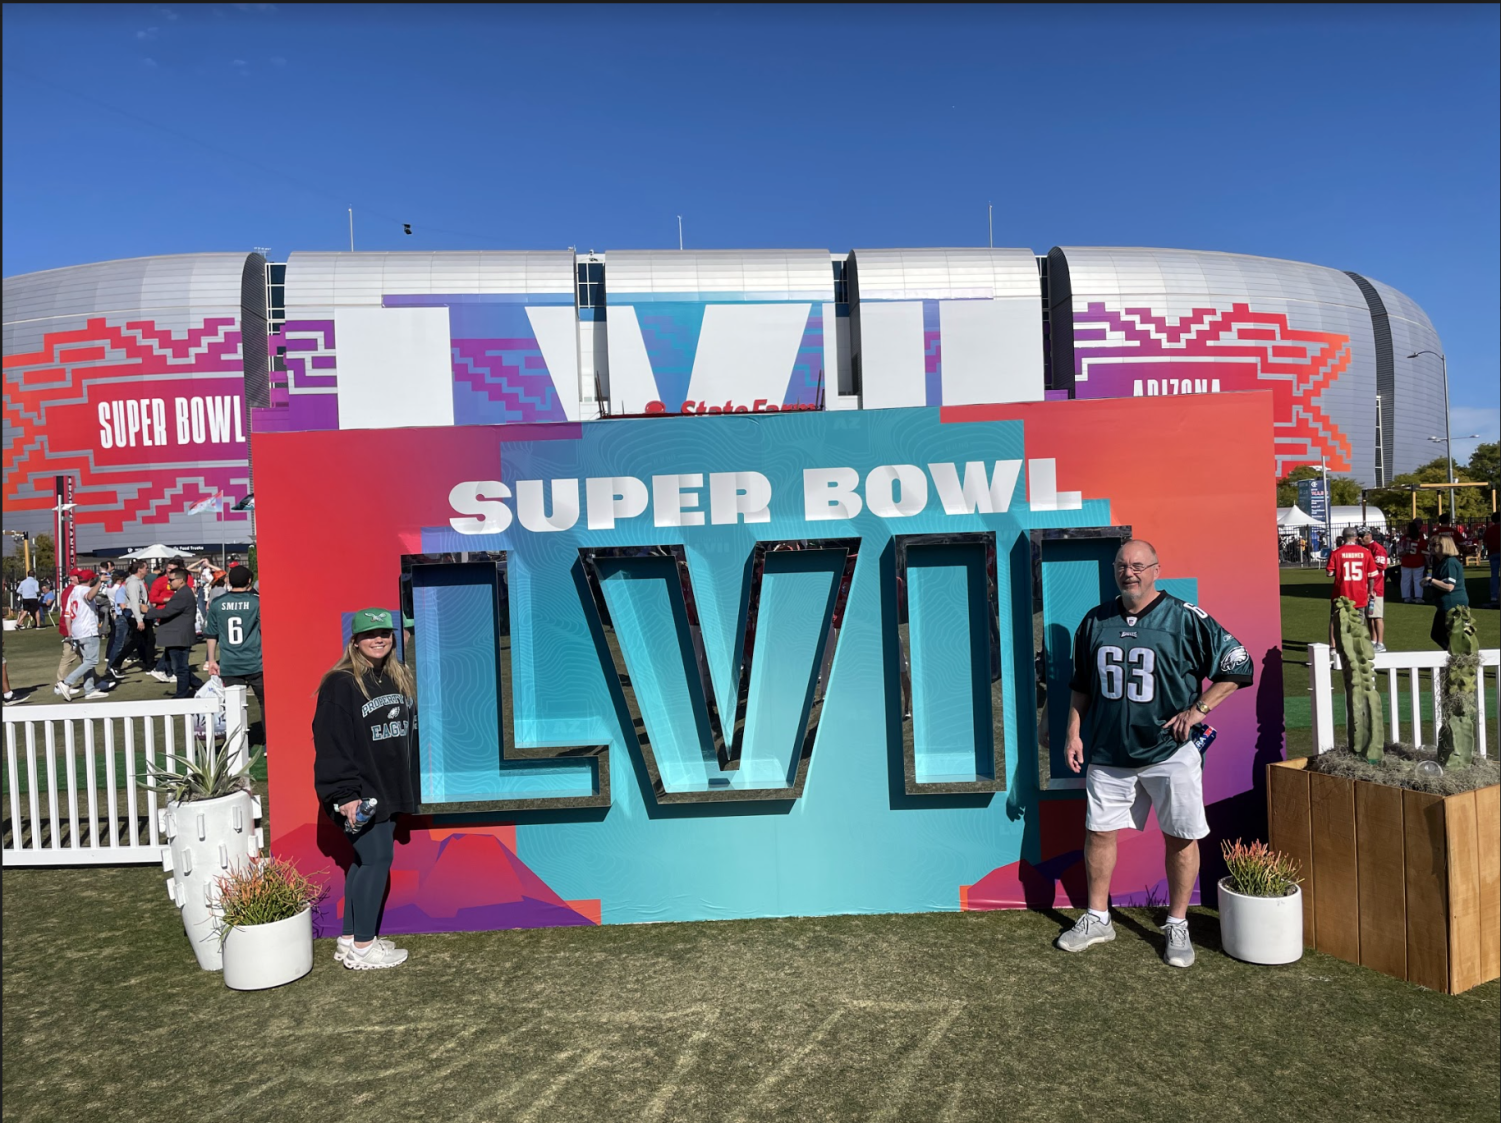 Super Bowl LIV – an exceptional fan experience thanks to the